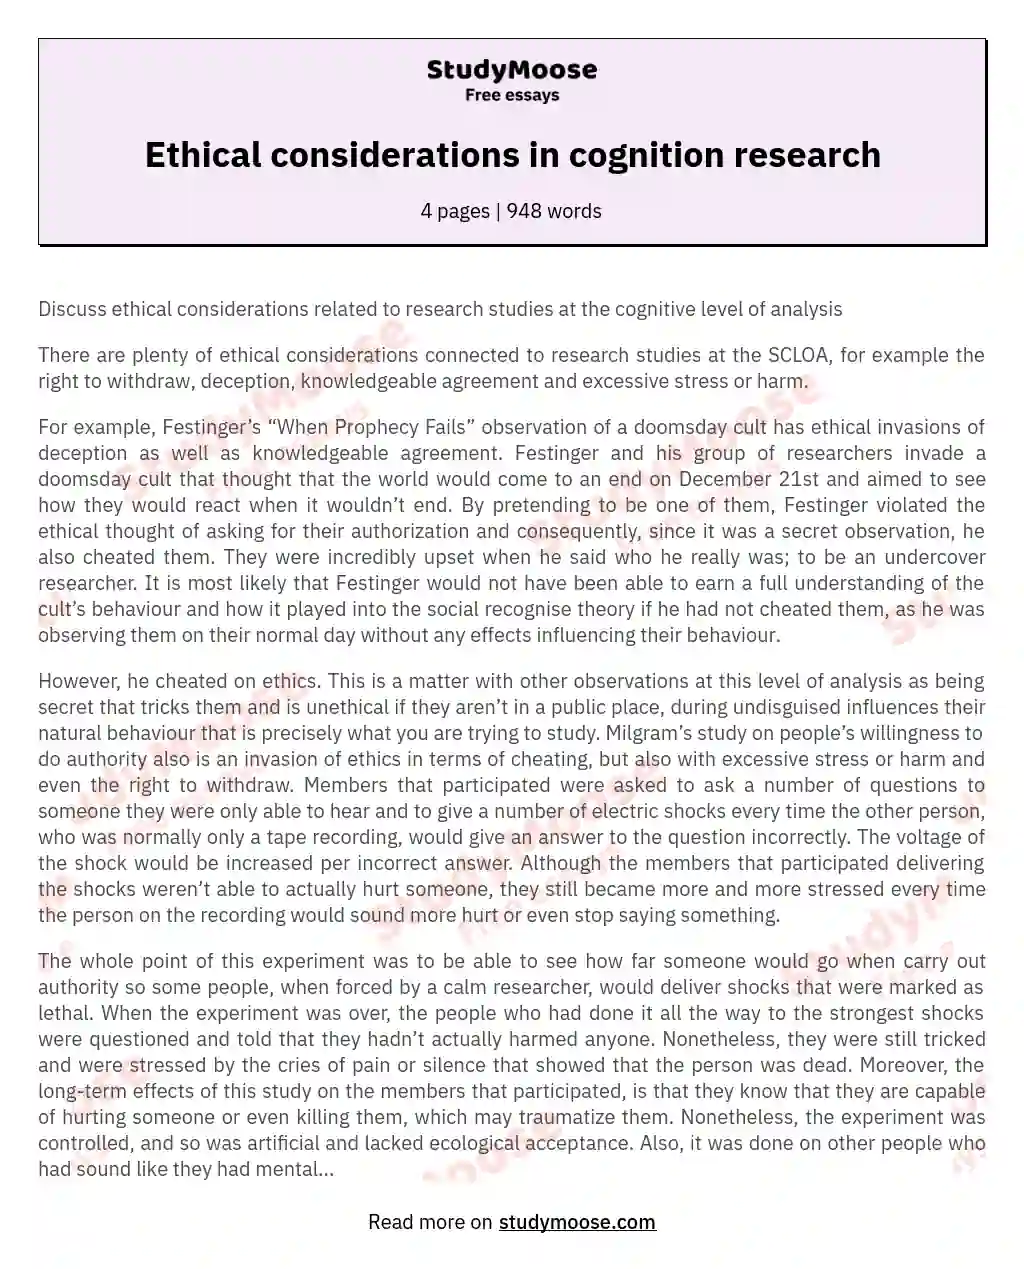 Ethical considerations in cognition research essay